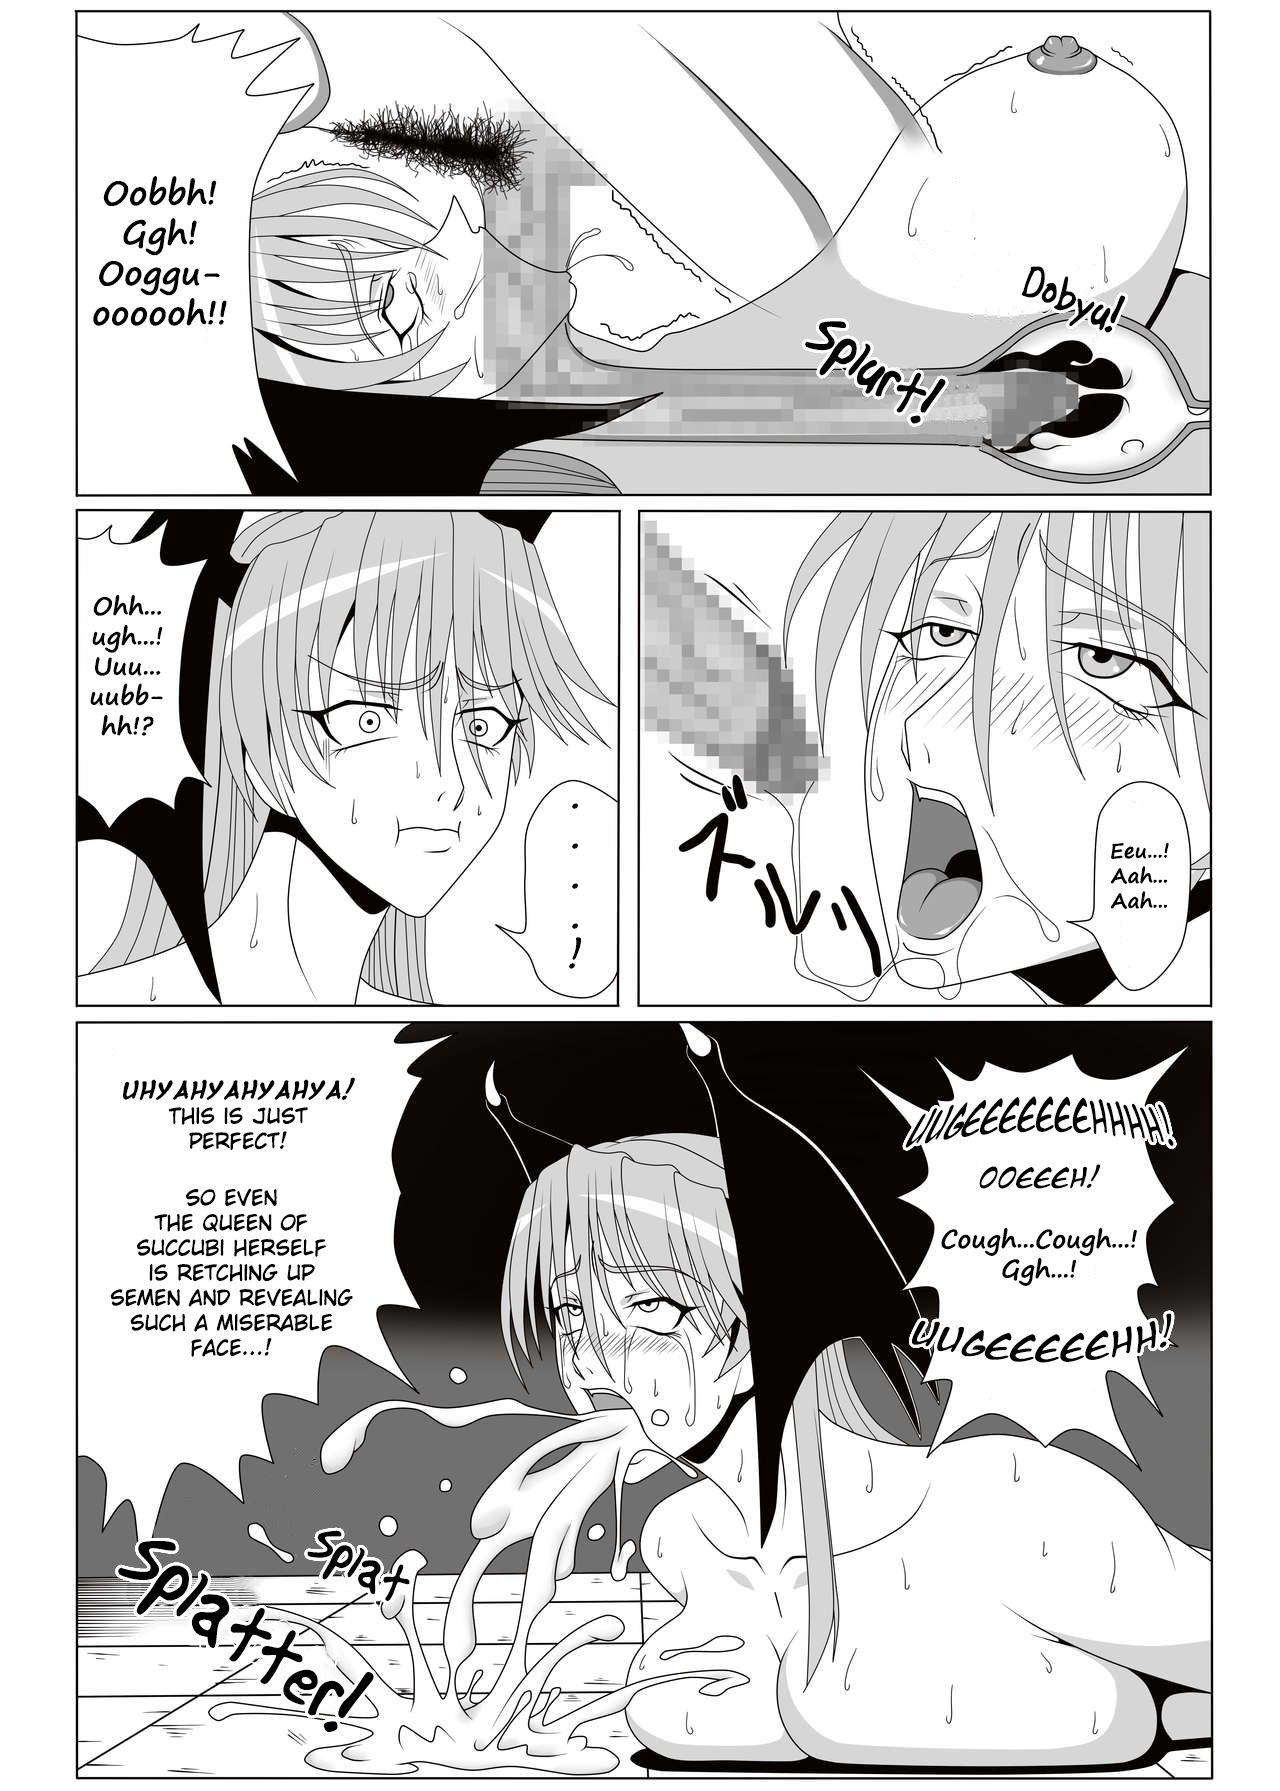 Couch Inma NO Ranbu | Lewd Devil's Revelry - Darkstalkers Penis Sucking - Page 10